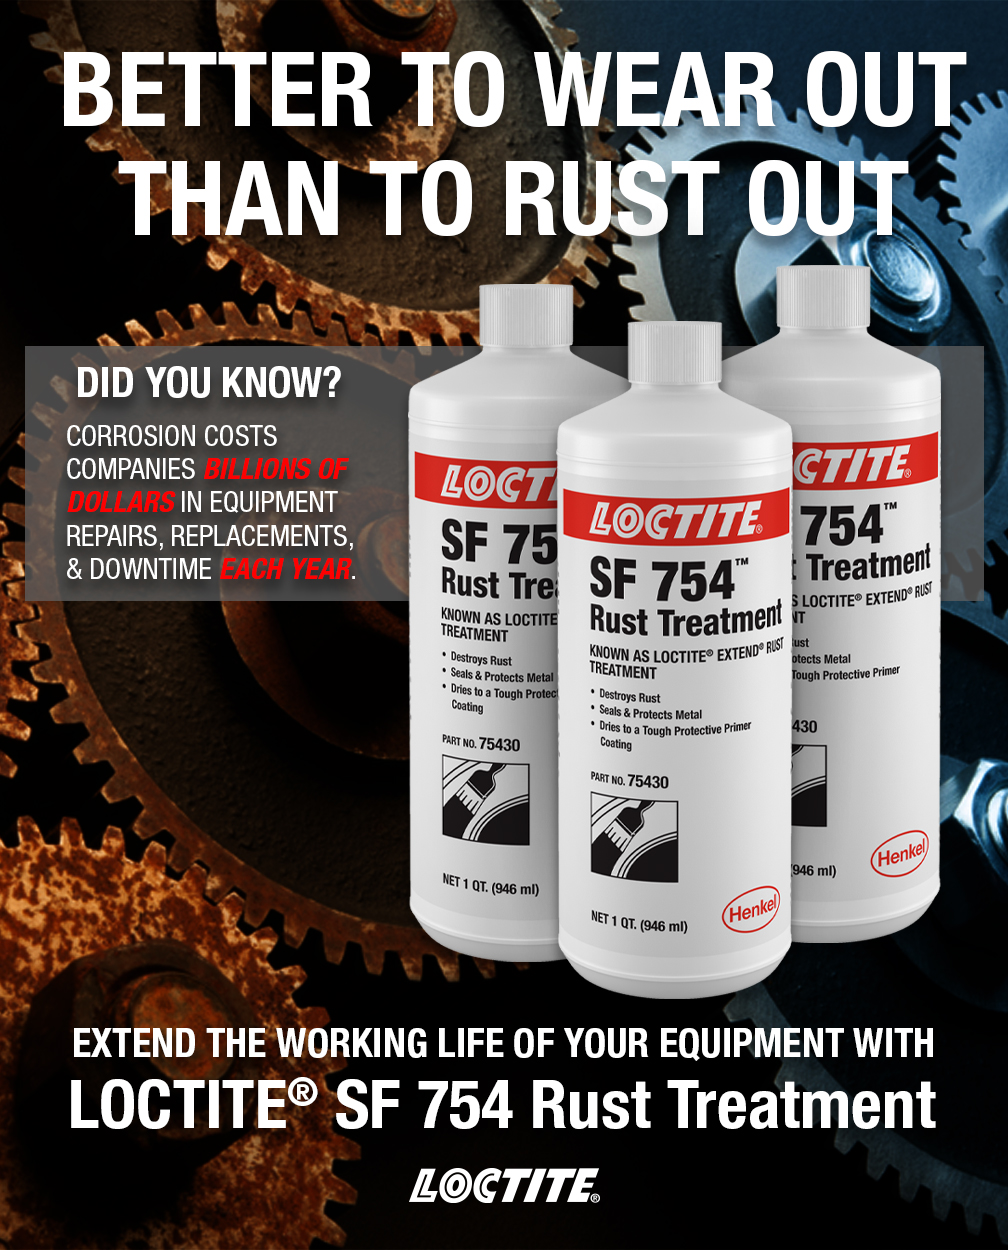 Did Loctite Rust Neutralizer Actually Work?